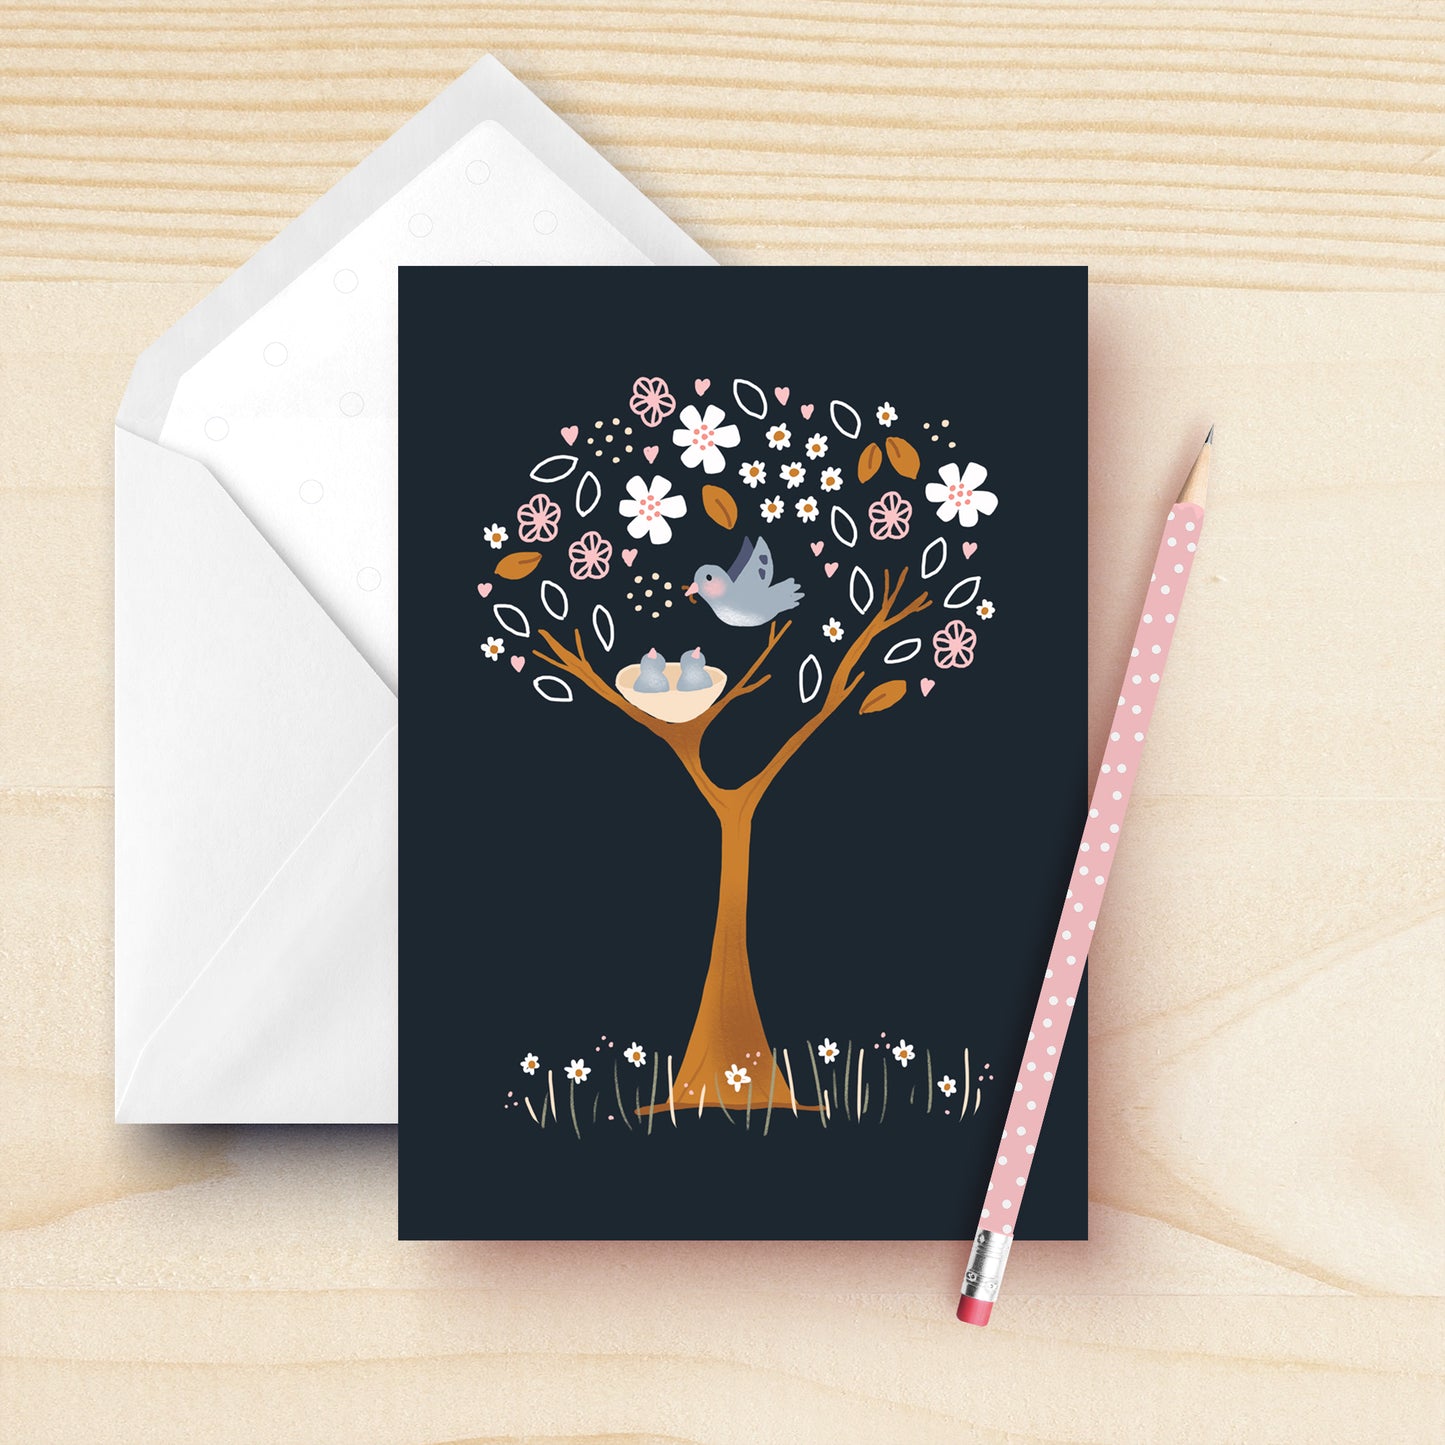 Blank greeting card geaturing a blue bird feeding it's young babies in the nes. The tree is a beautiful pink and white floral tree on a dark blue background. Hand drawn by Kathrin Legg